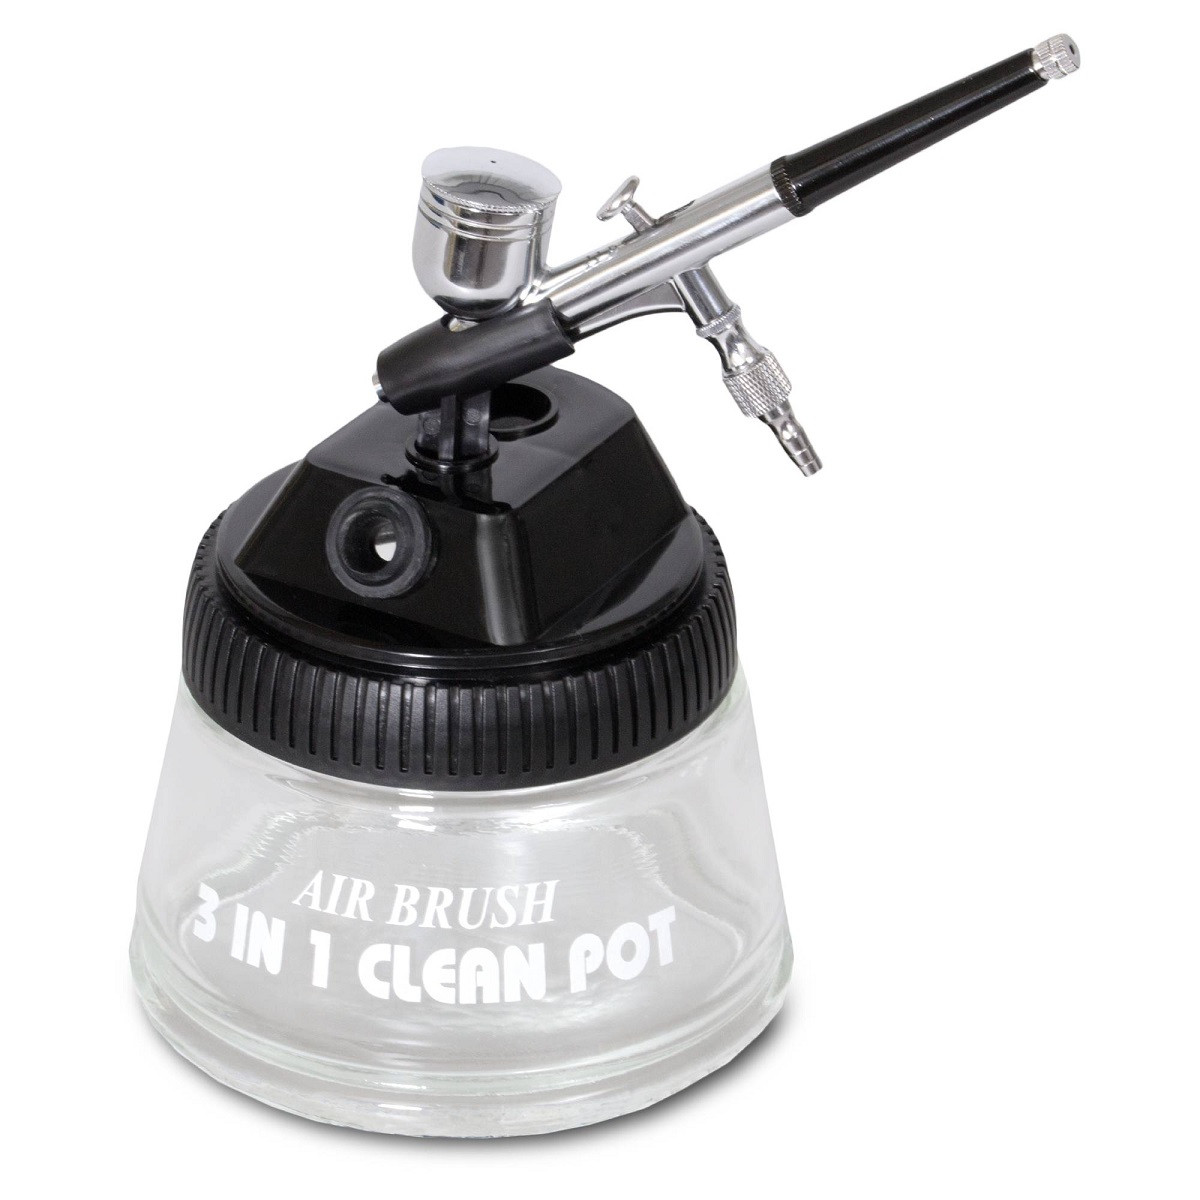 Städter Airbrush Cleaning Pot